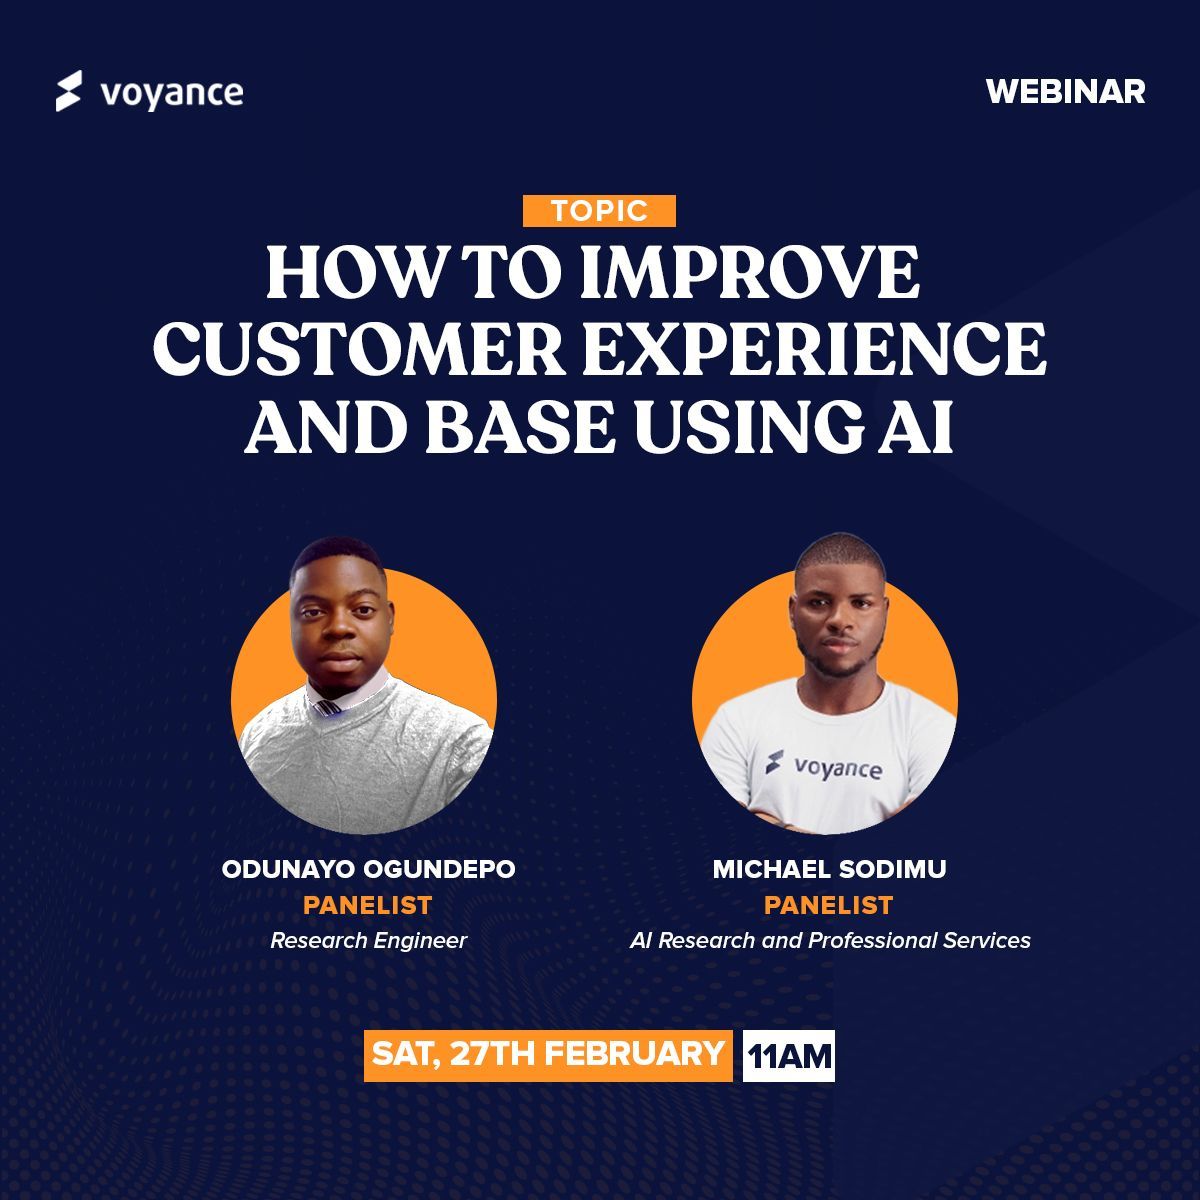 Voyance to host webinars that help businesses maximise their data